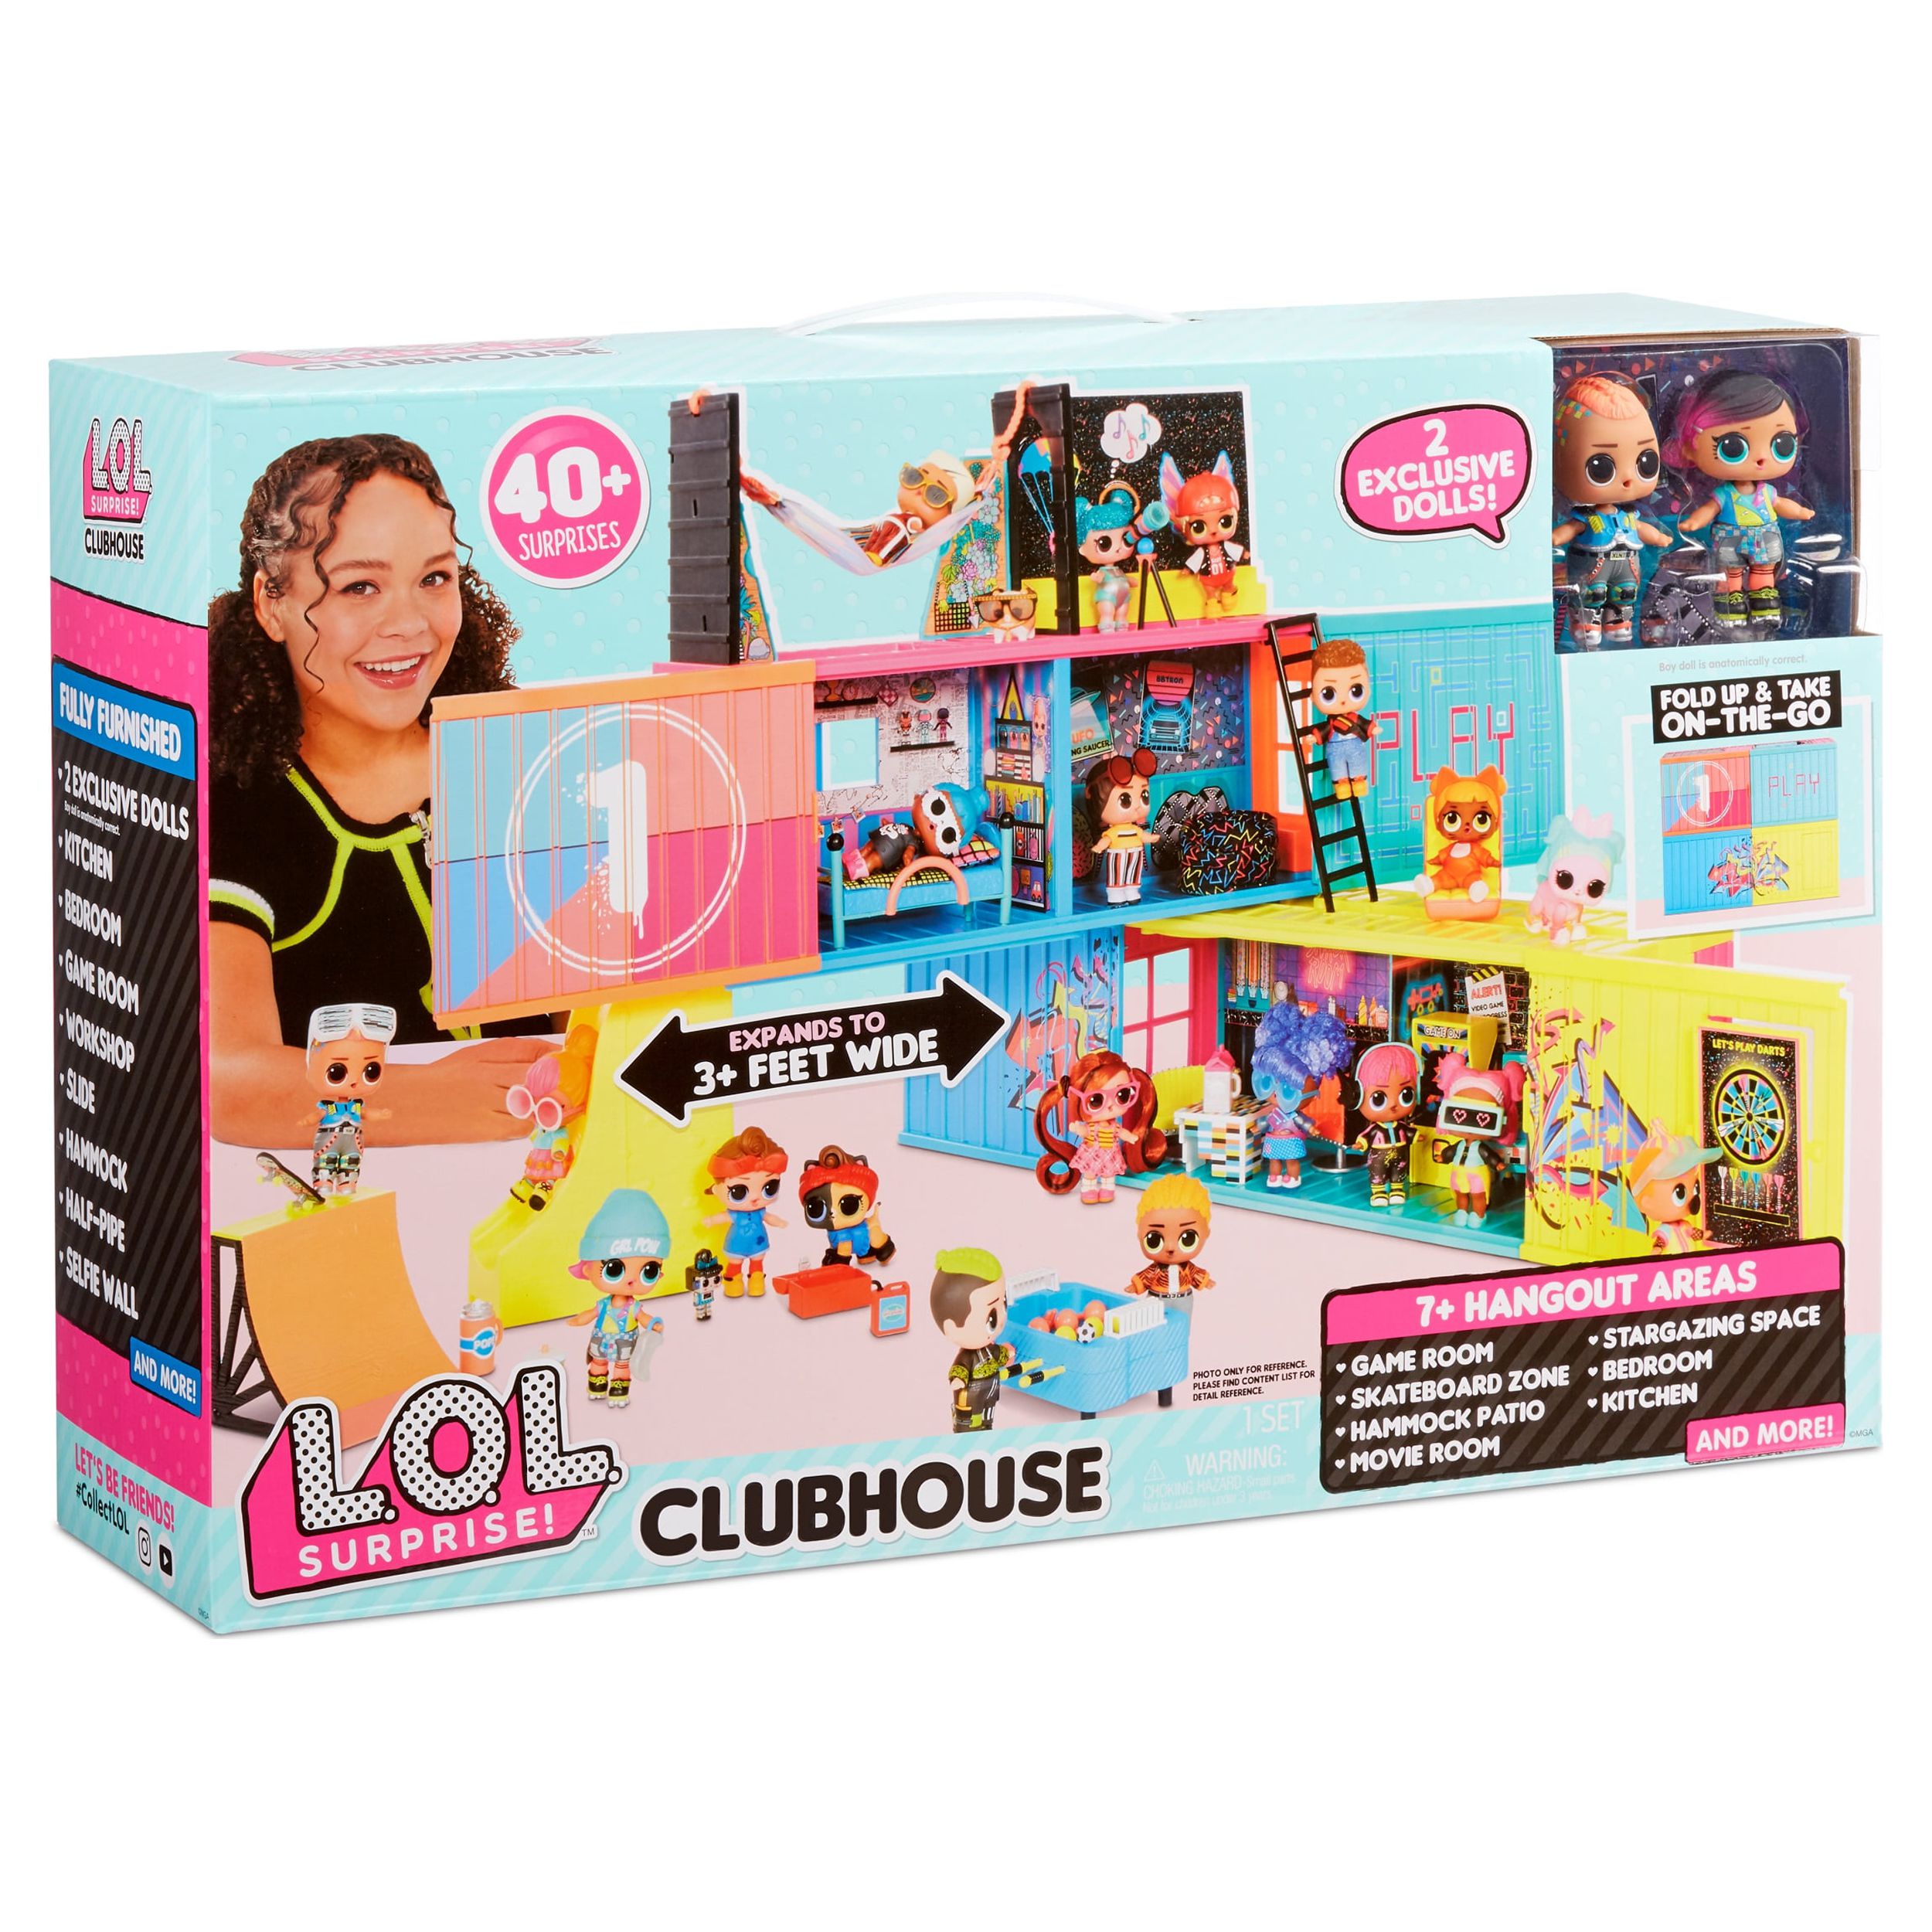 LOL Surprise Clubhouse Playset With 40+ Surprises and 2 Exclusives Dolls, Great Gift for Kids Ages 4 5 6+ - image 6 of 11